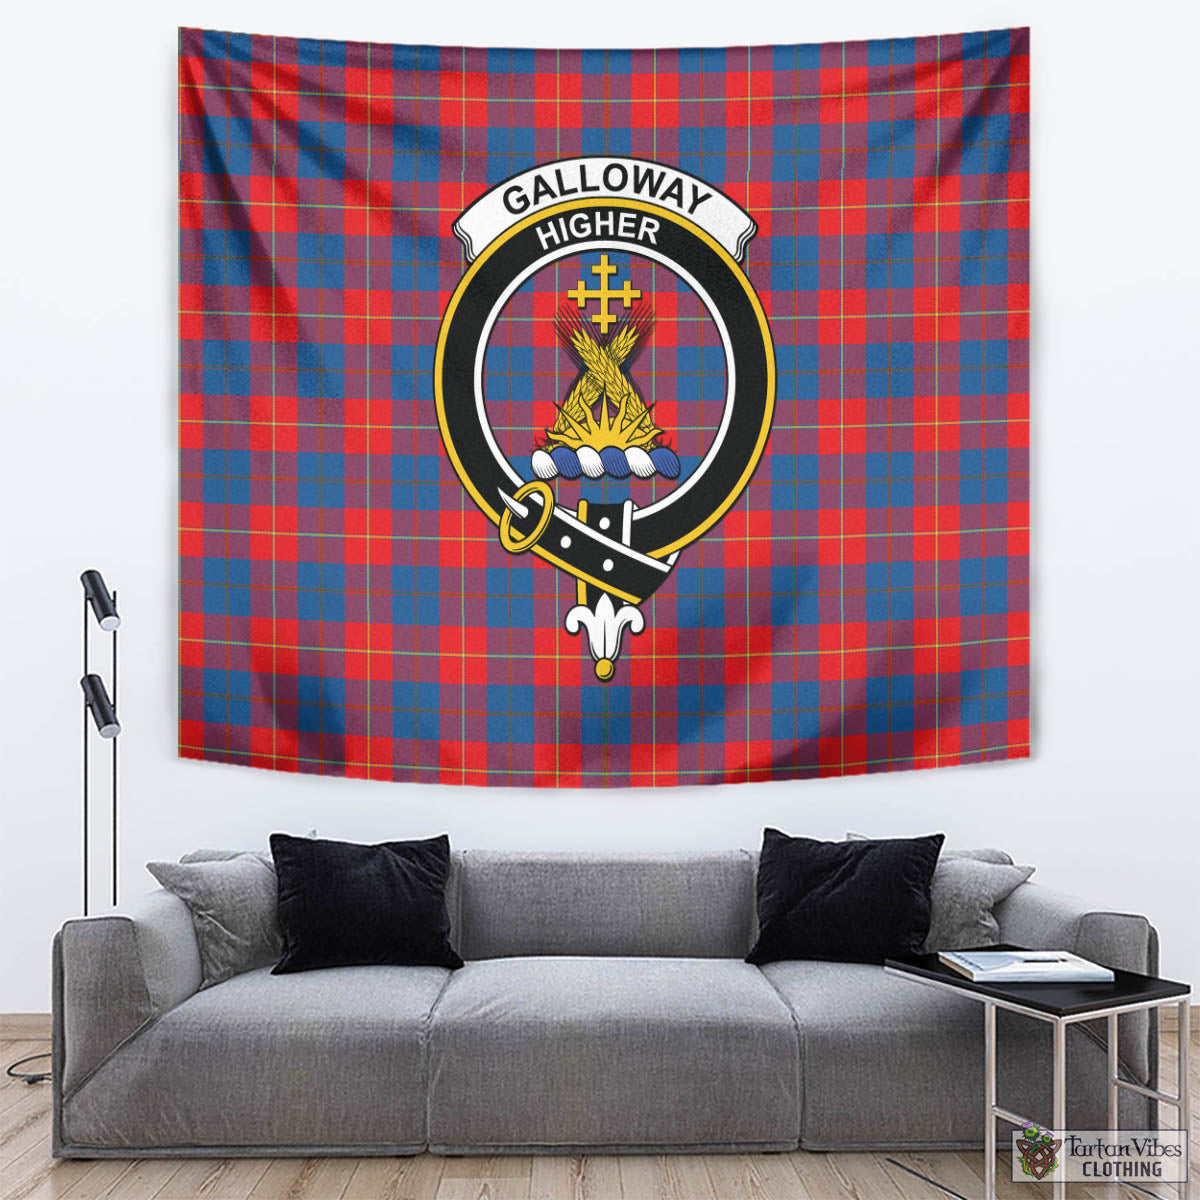 Tartan Vibes Clothing Galloway Red Tartan Tapestry Wall Hanging and Home Decor for Room with Family Crest